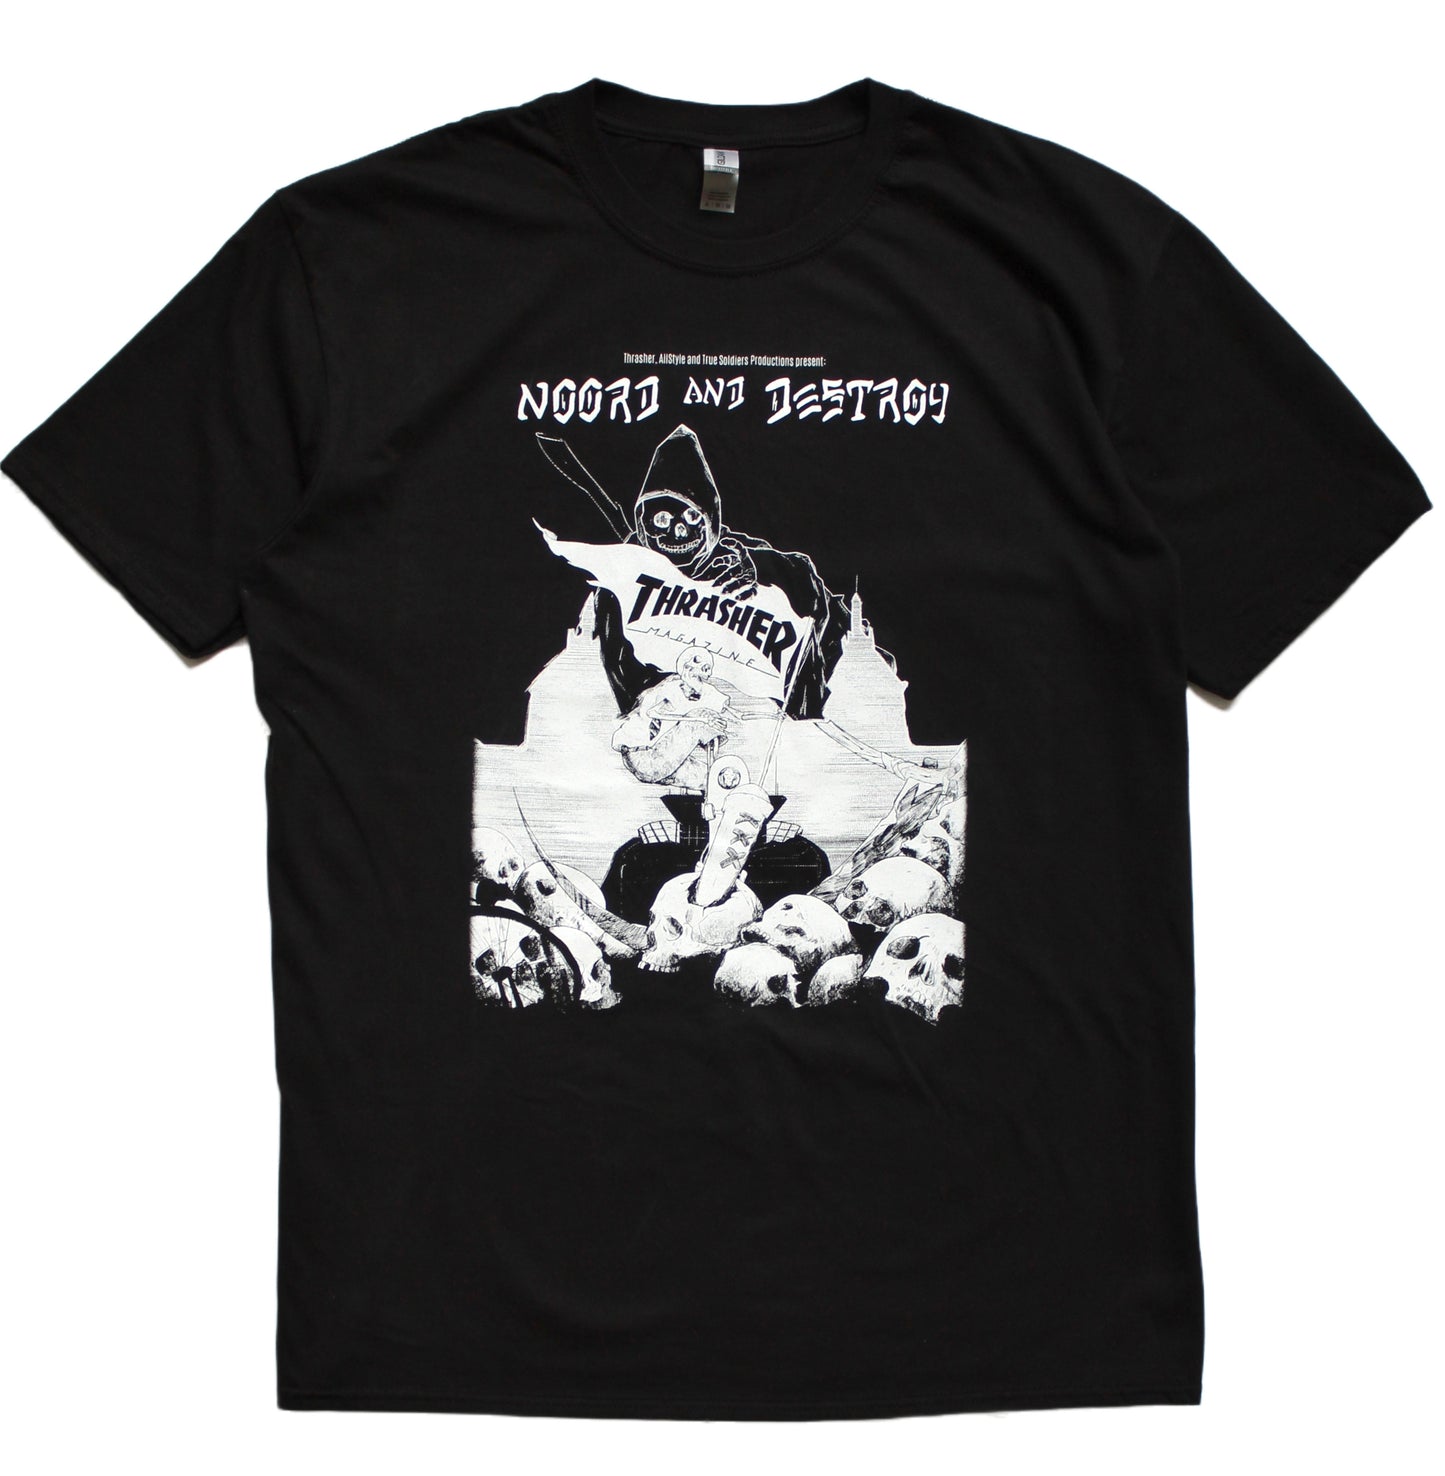 *NOORD and DESTROY* T-Shirt (Limited Edition)